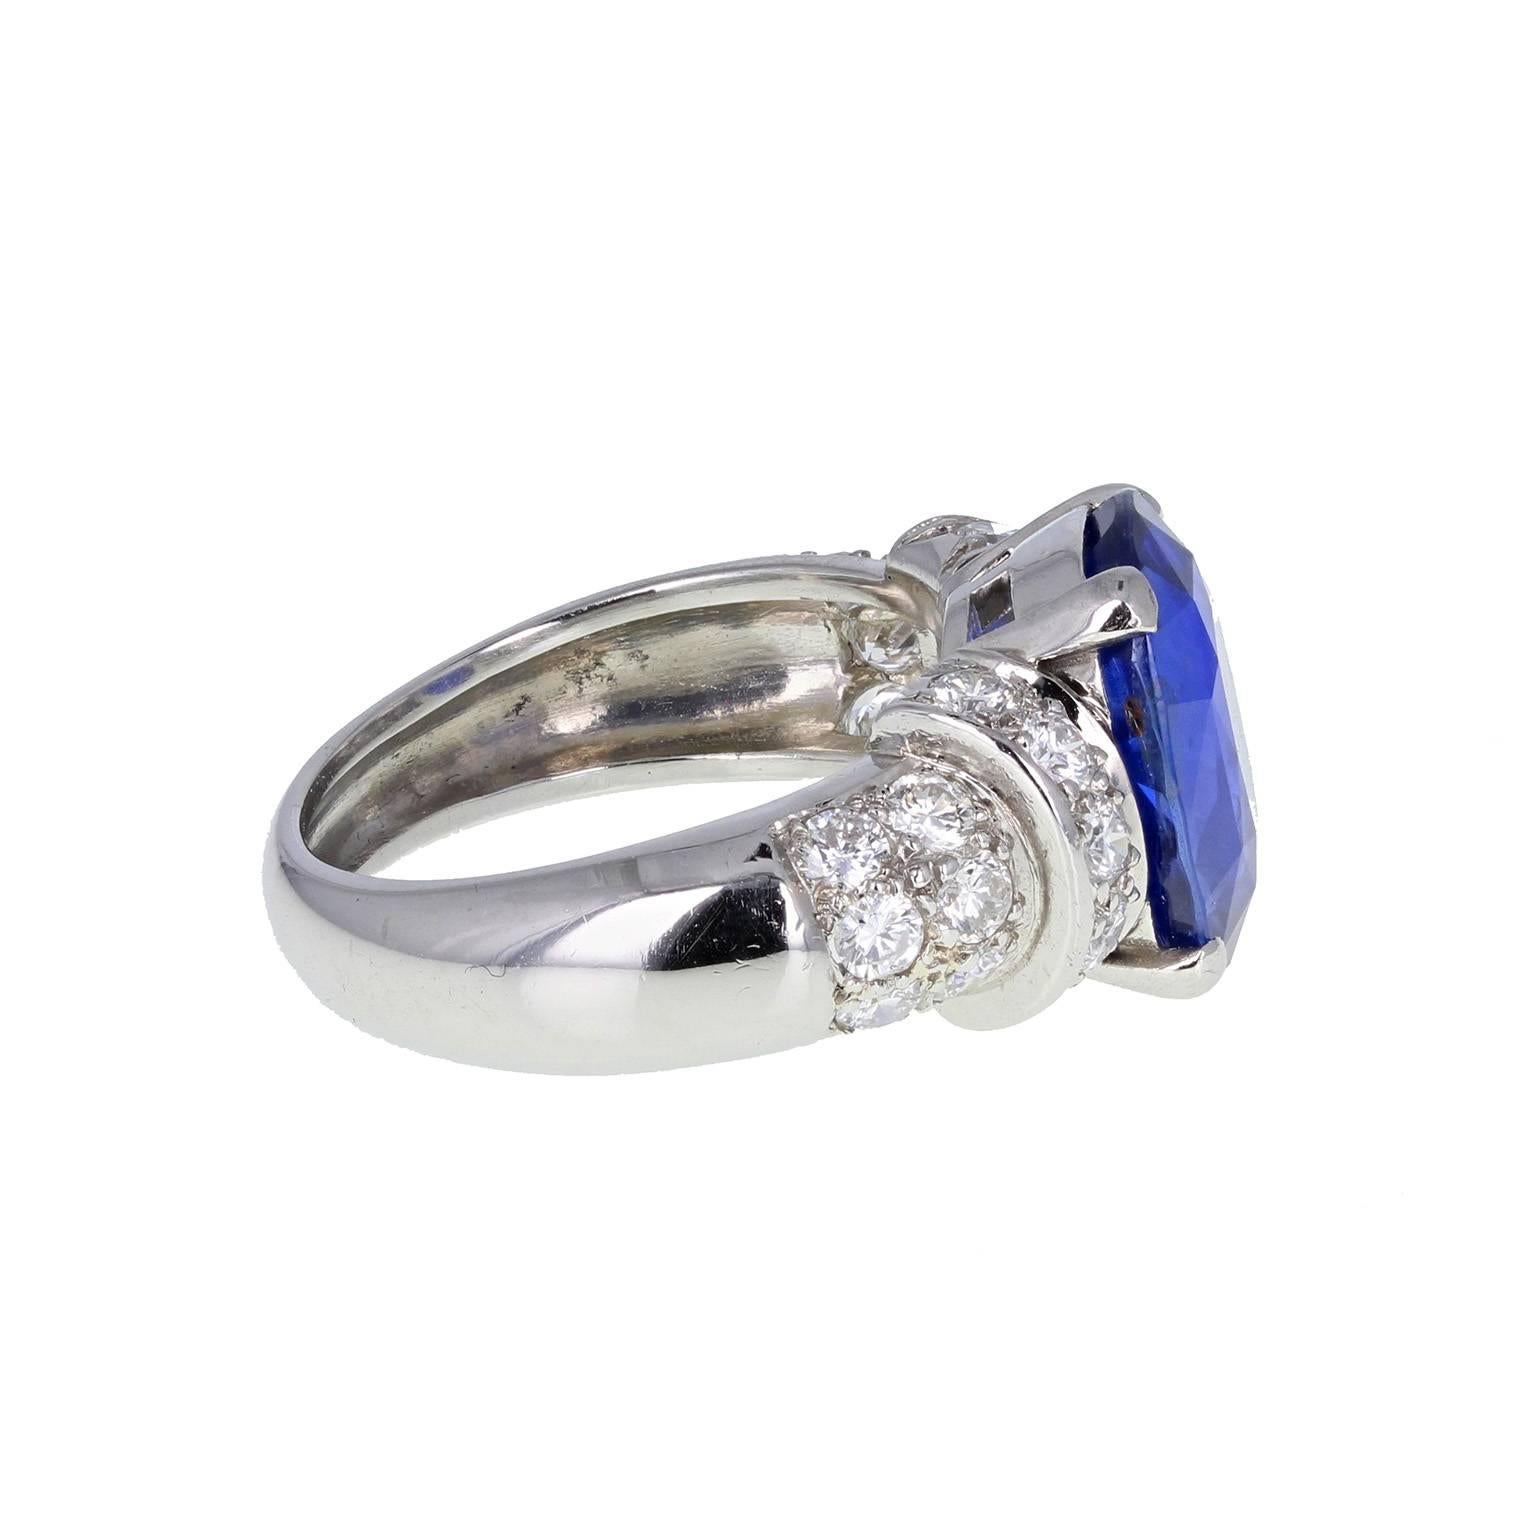 A beautiful ring featuring a central oval-cut blue sapphire, mounted in four claws, flanked on each side by a bar of pavé diamonds, leading to a wide shank, with pavé diamond shoulders. Accompanied by a GCS certificate stating that the sapphire is